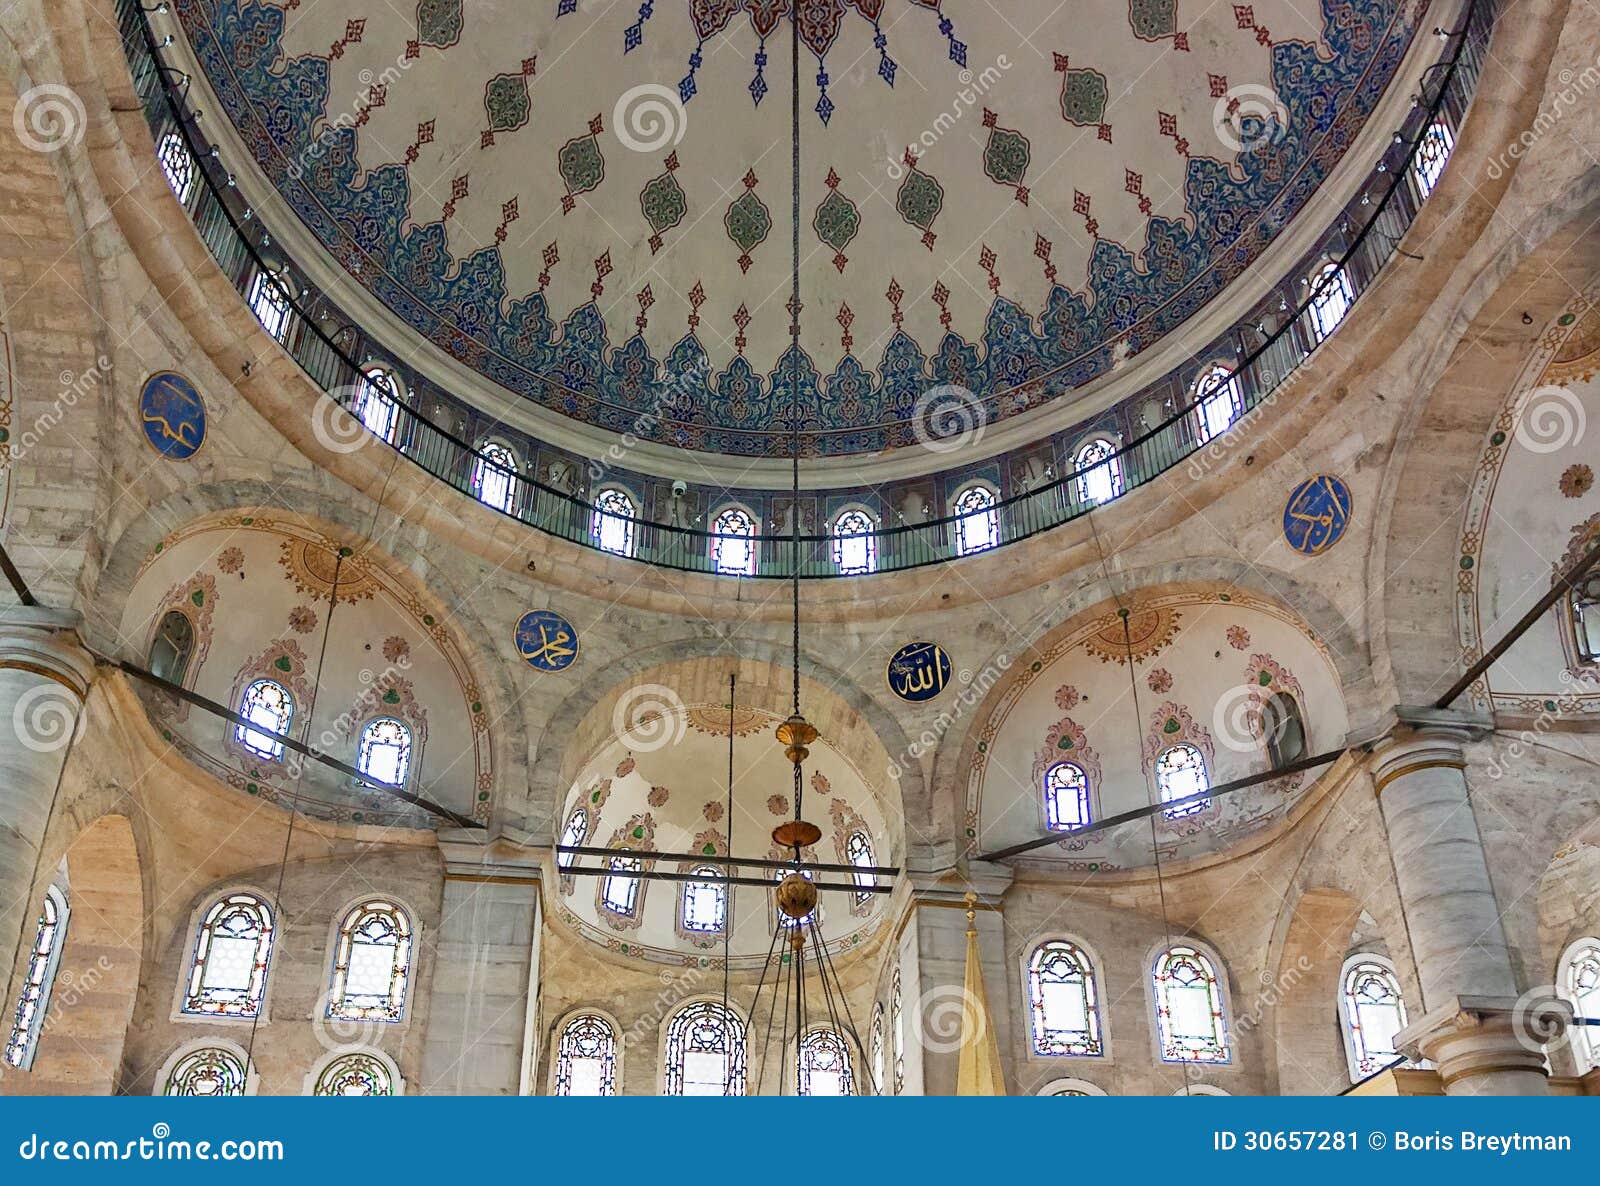 eyup sultan mosque, istanbul